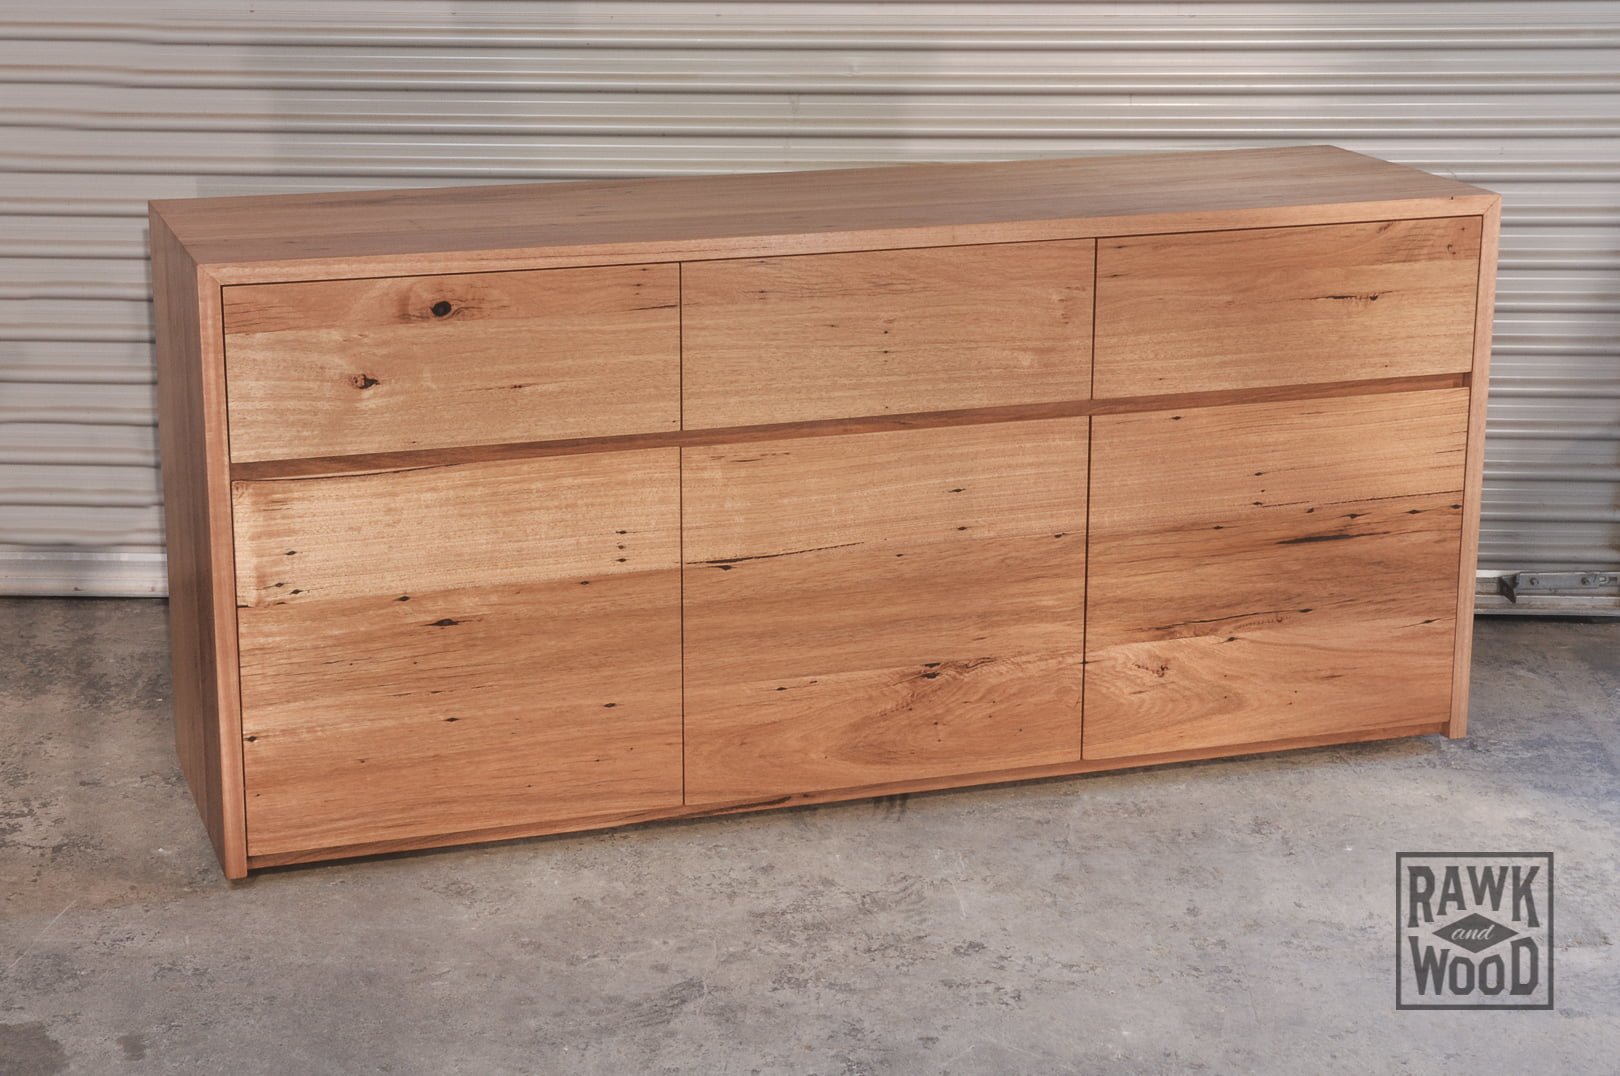 Recycled-Timber-Dresser, made in Melbourne by Rawk and Wood